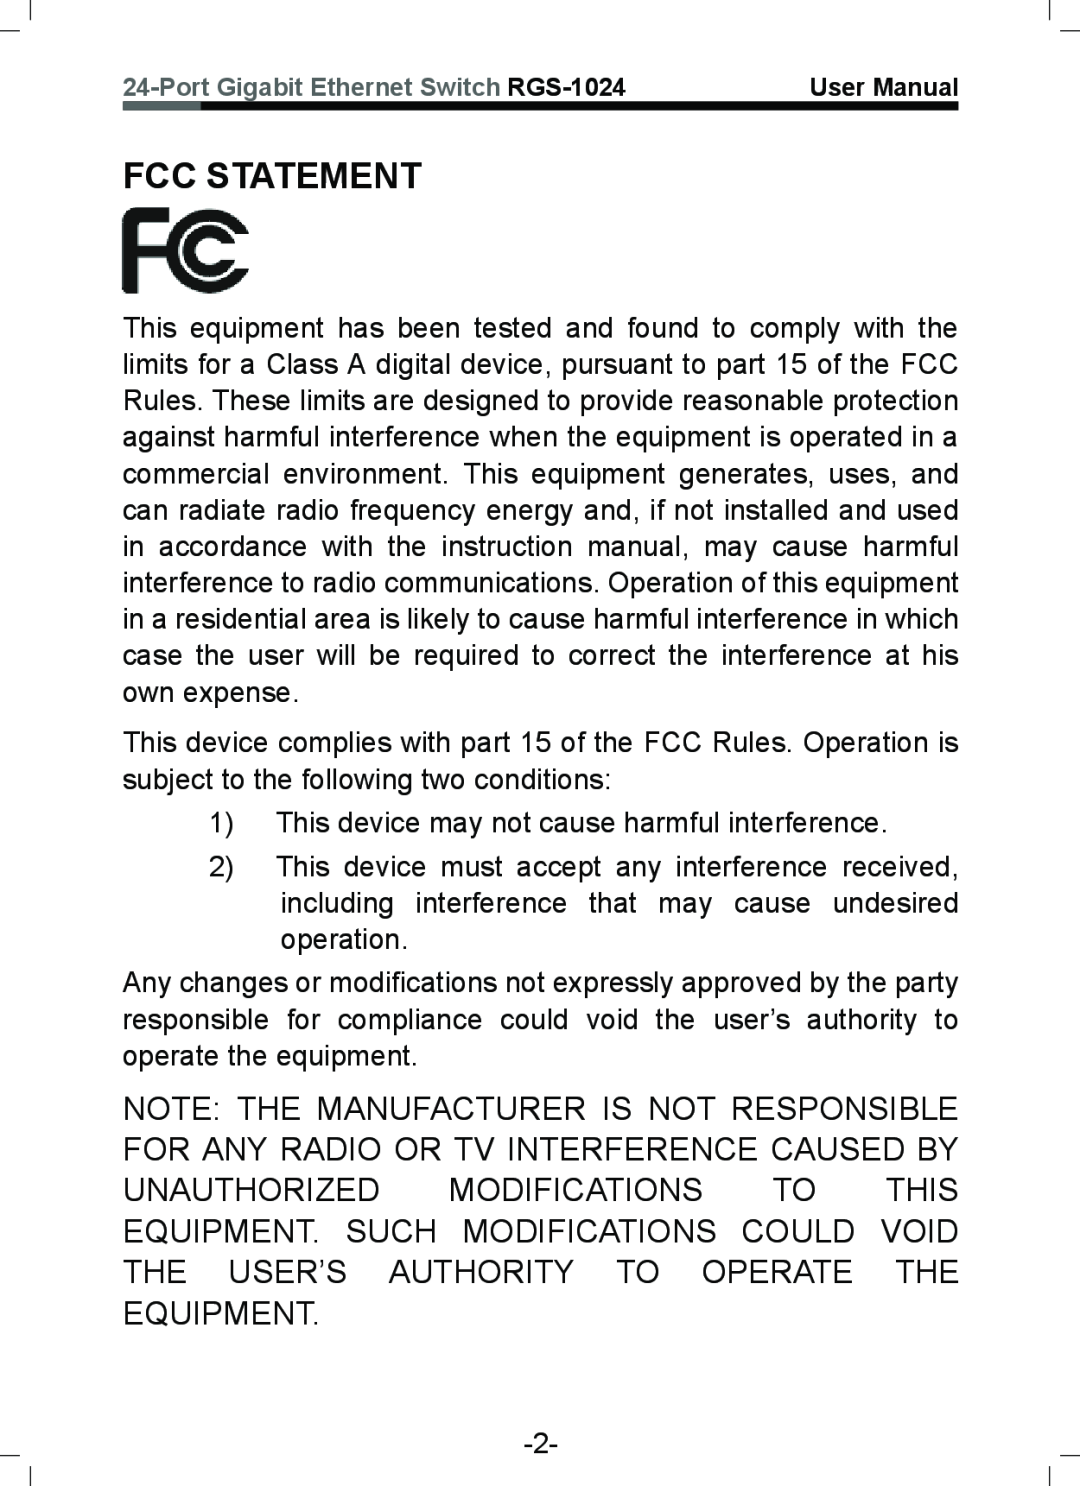 Rosewill RGS-1024 user manual Fcc Statement 